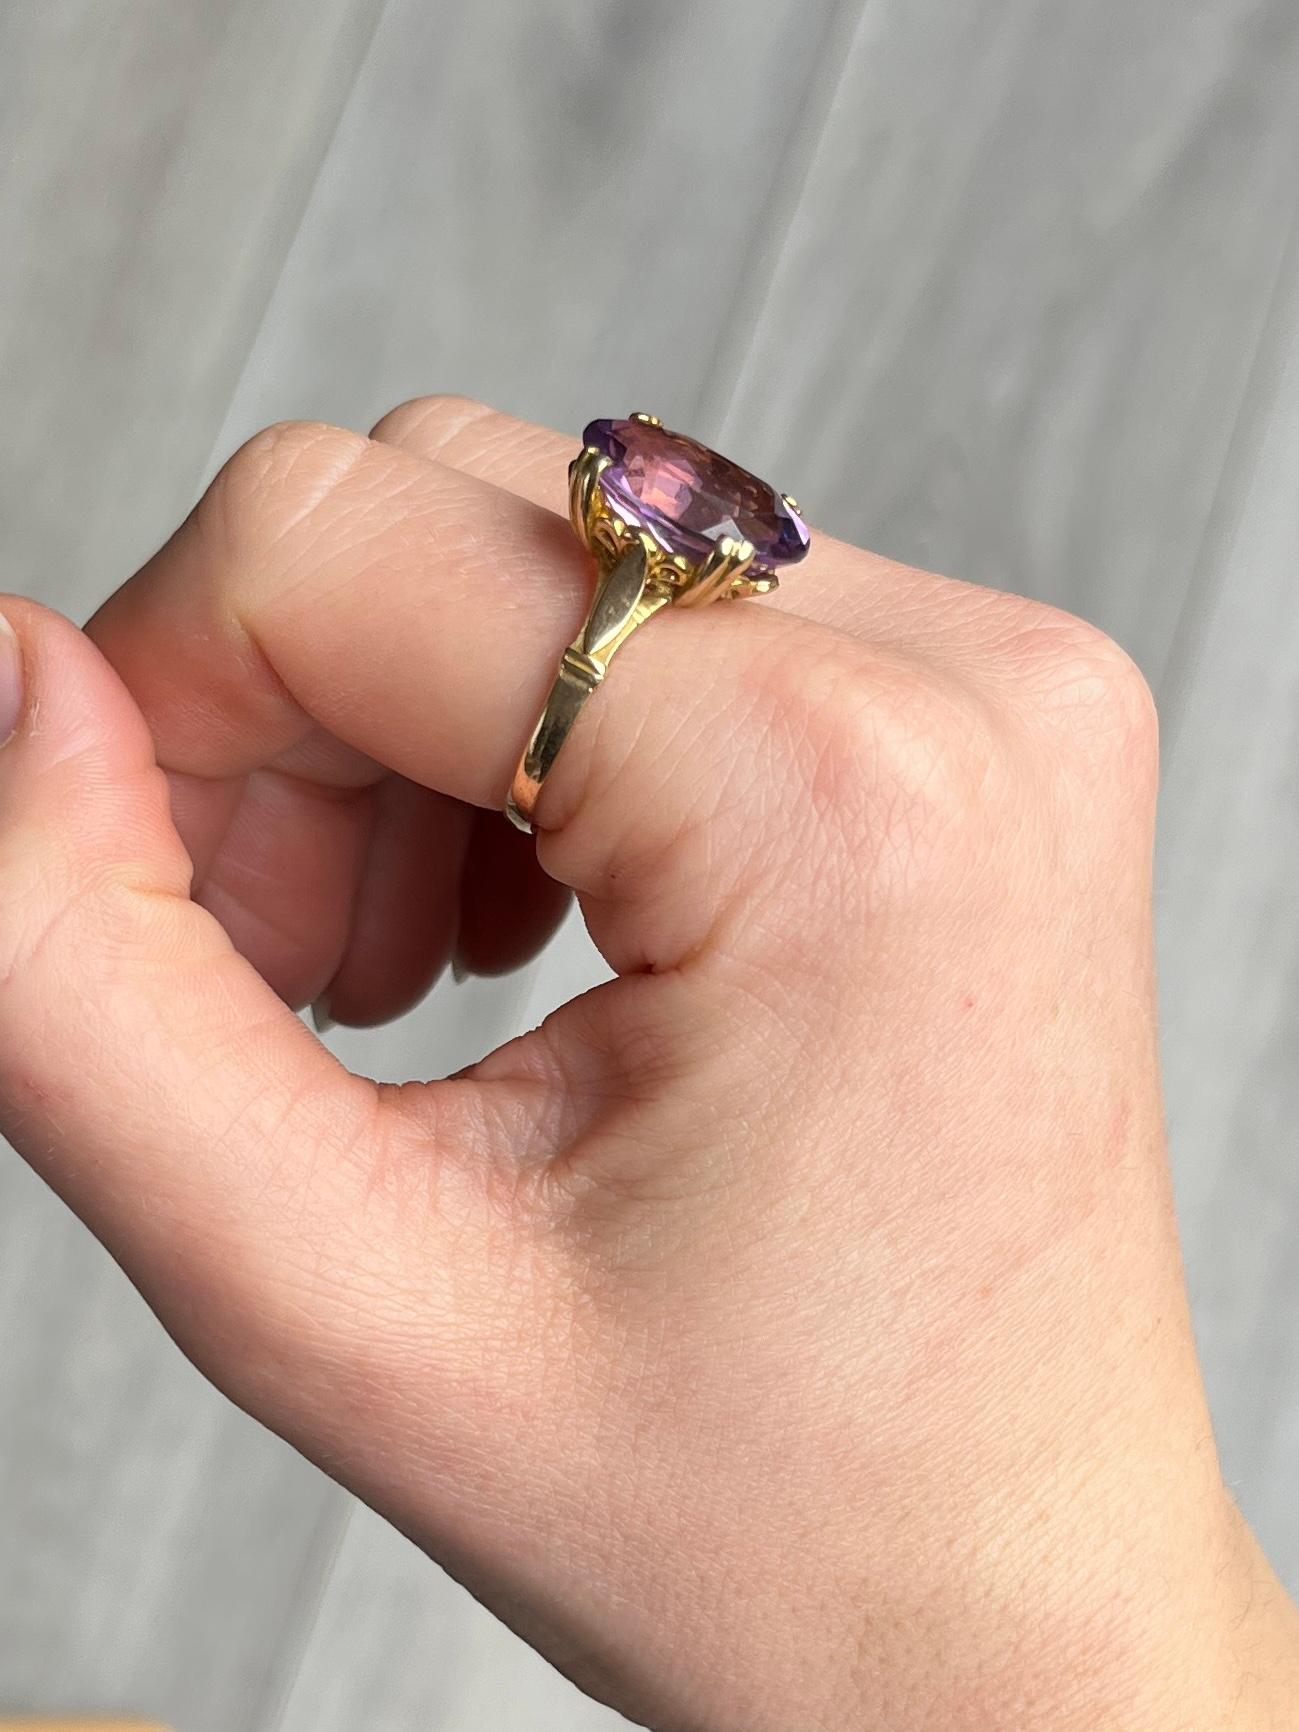 The amethyst set up high upon this ring is a gorgeous purple stone held in simple double claws. Modelled in 9carat gold and has an open work gallery. Fully hallmarked London 1968.

Ring Size: Q or 8
Stone Dimensions: 16x12mm 

Weight: 4.7g